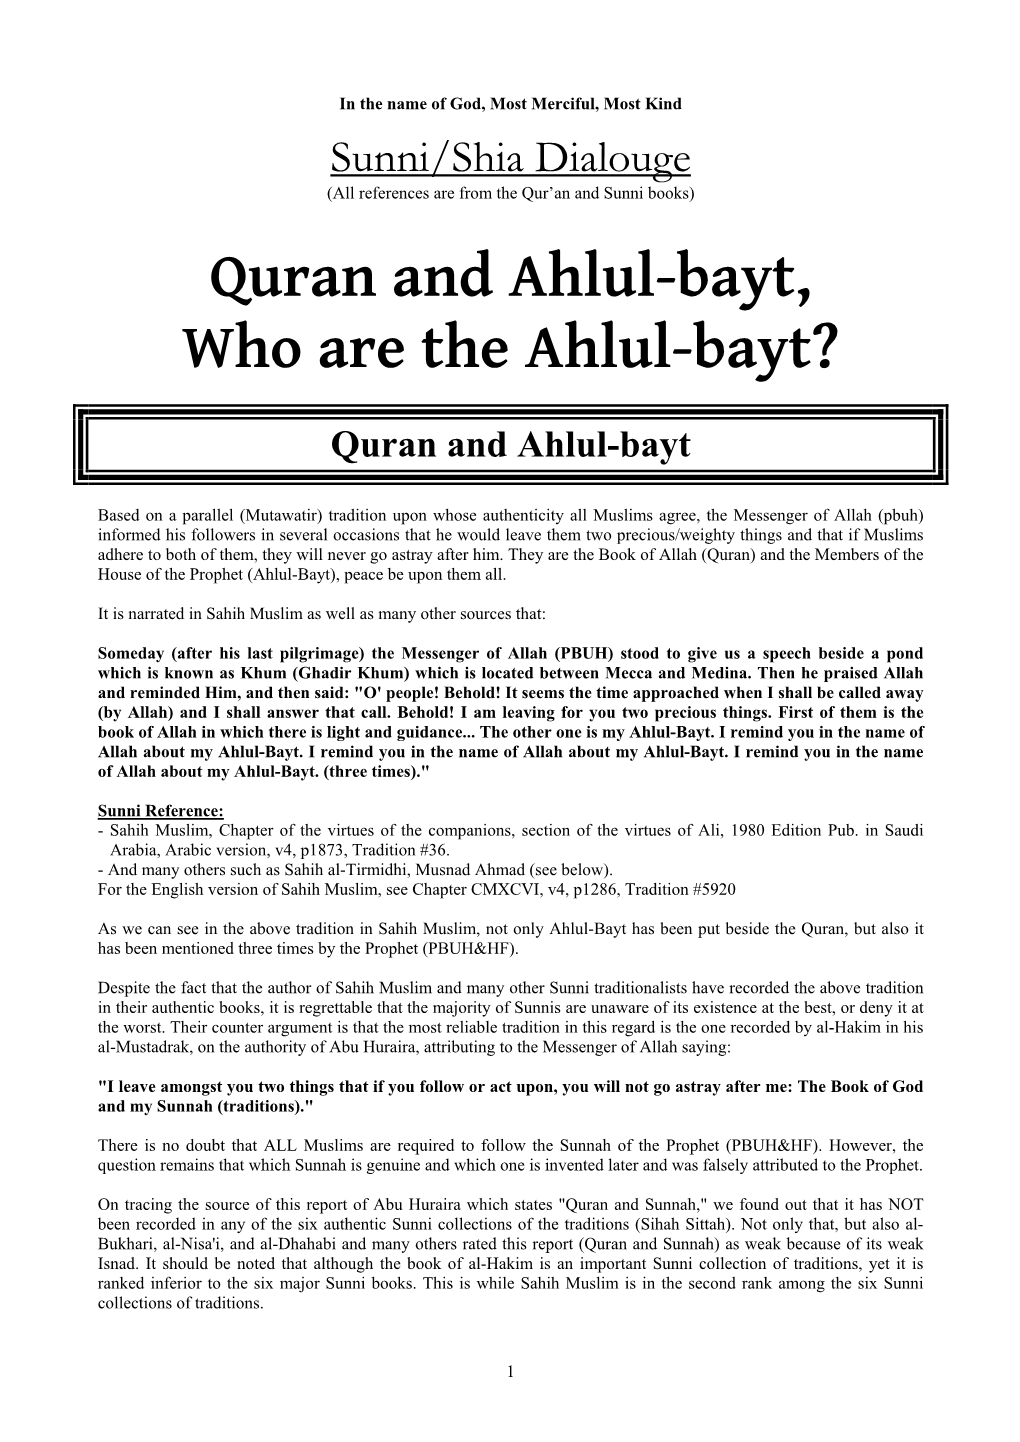 Quran and Ahlul-Bayt, Who Are the Ahlul-Bayt?